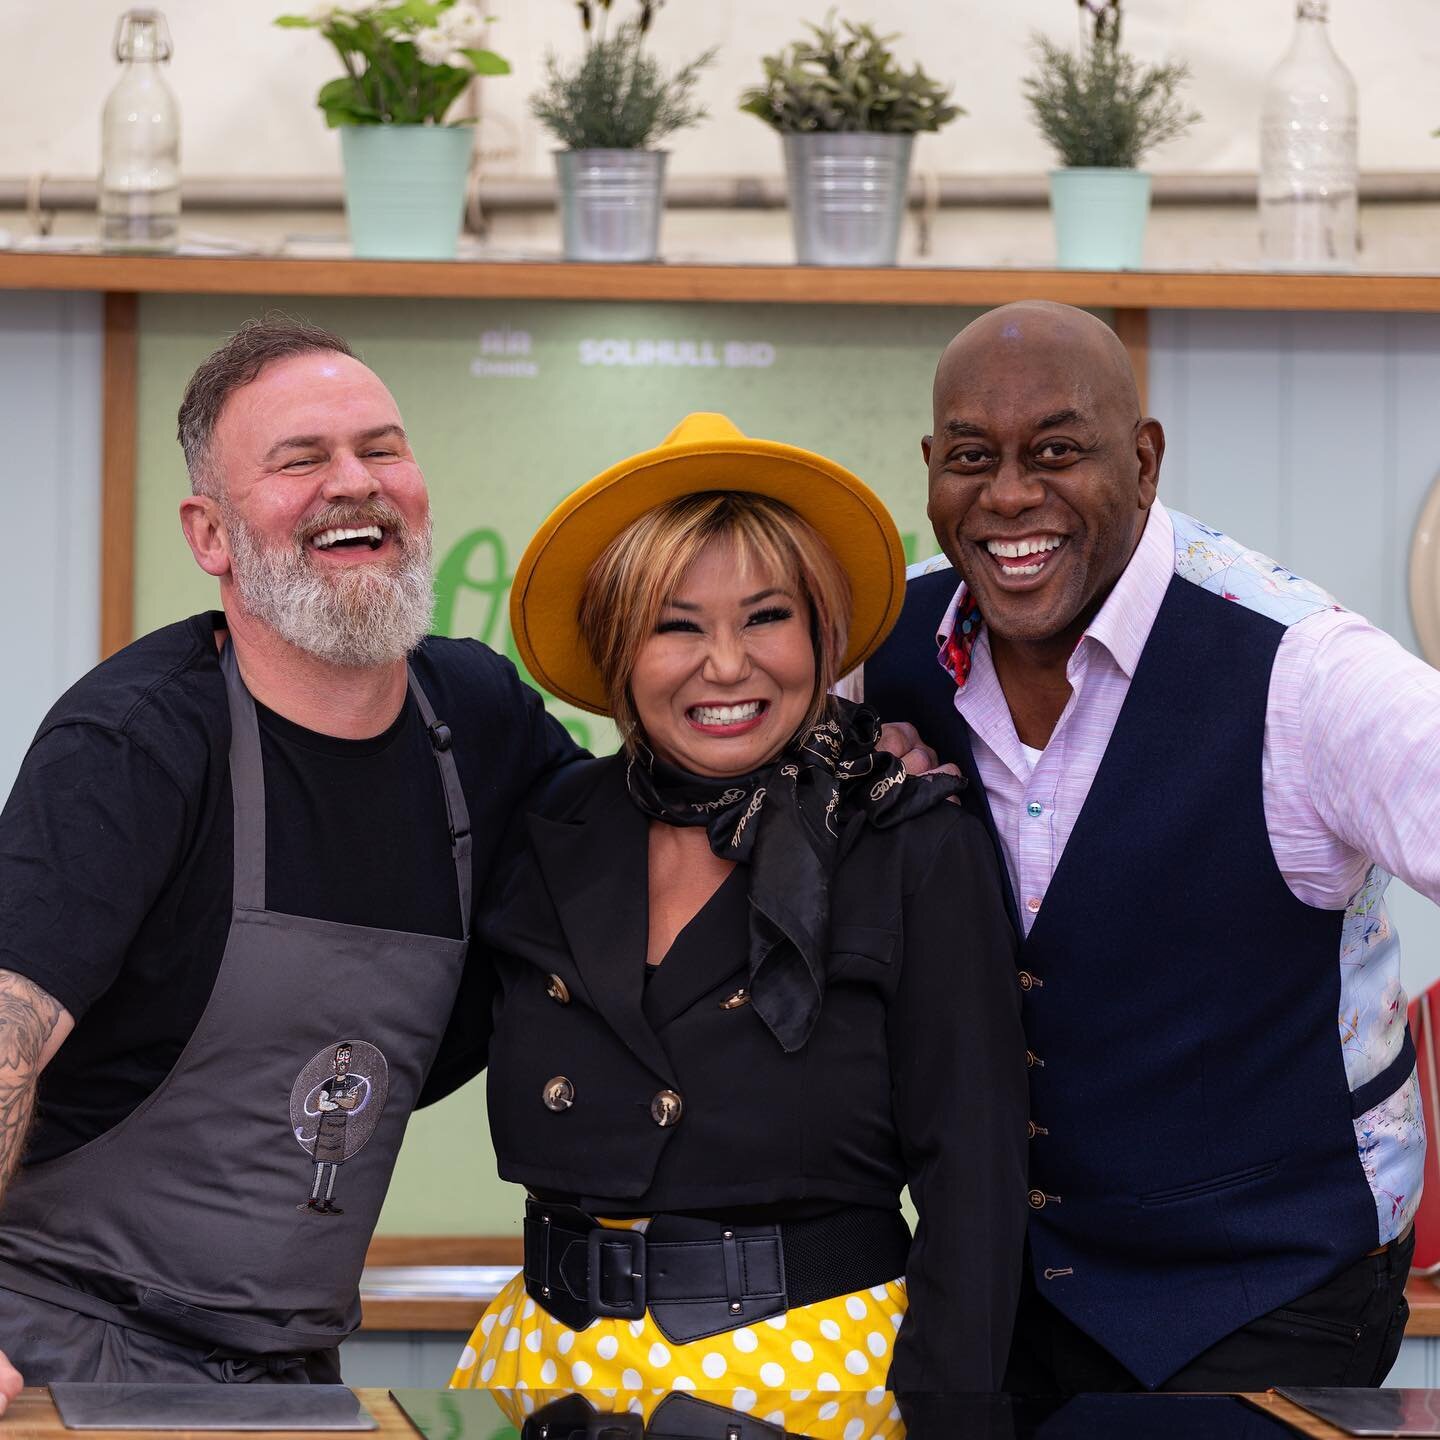 📸 Capturing culinary magic at Solihull Food Festival! 🍽️✨ Spotted the incredible Ainsley Harriott, Glynn Purnell, and Pookie Tredell cooking up a storm!